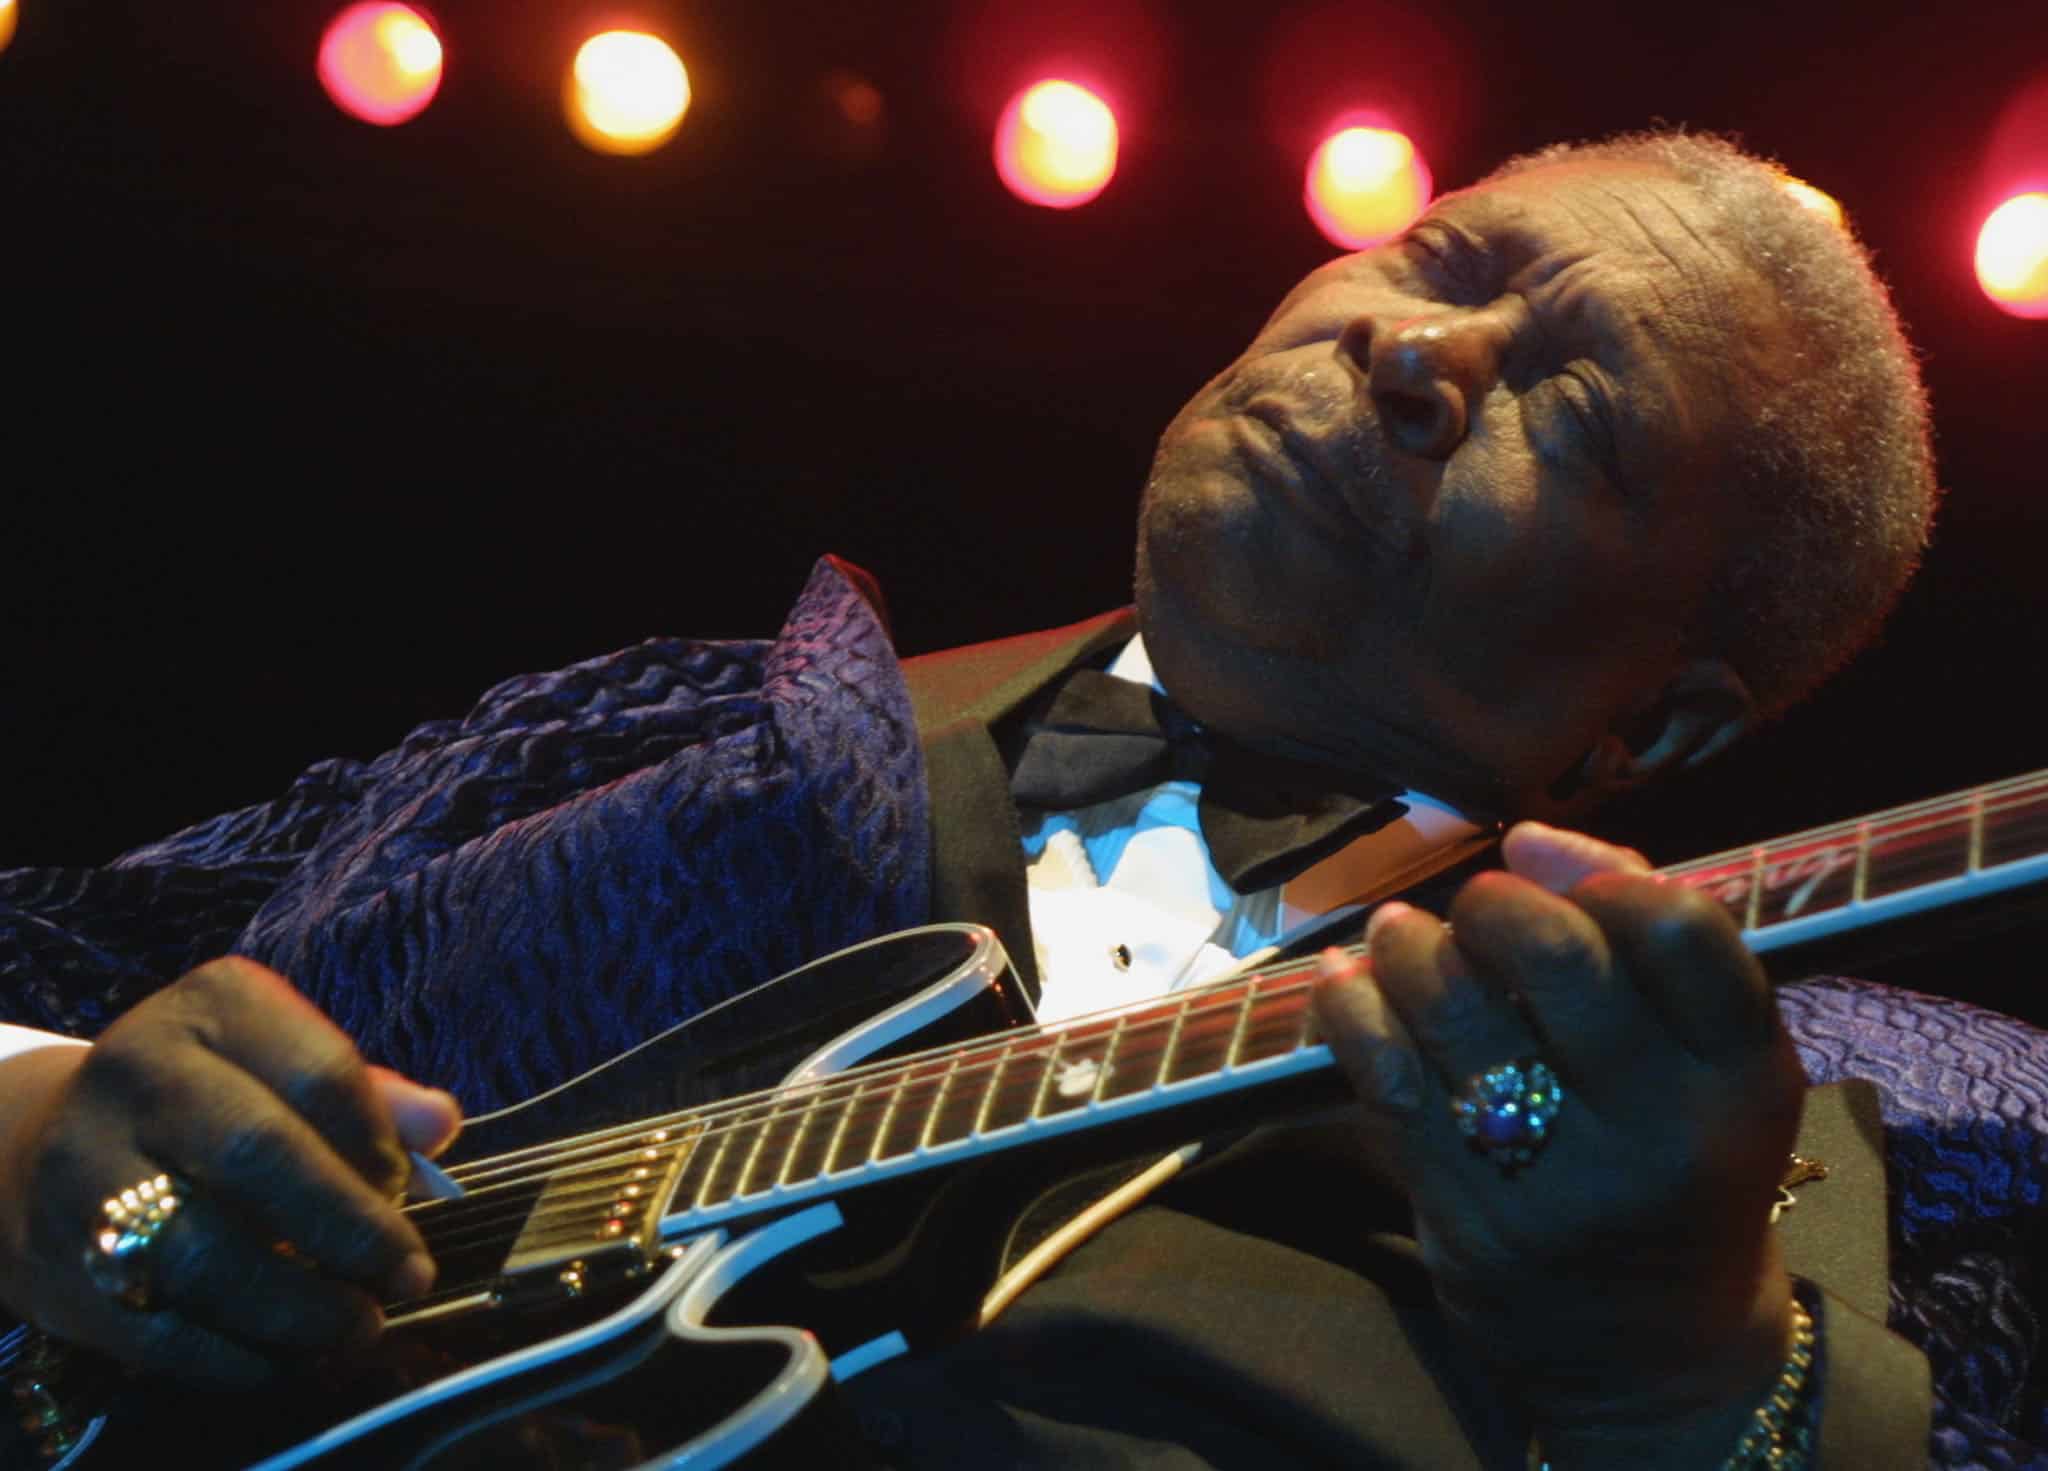 Blues legend B.B. King performing in Nice, southern France during the 8th Nice Jazz festival on July 25, 2001.